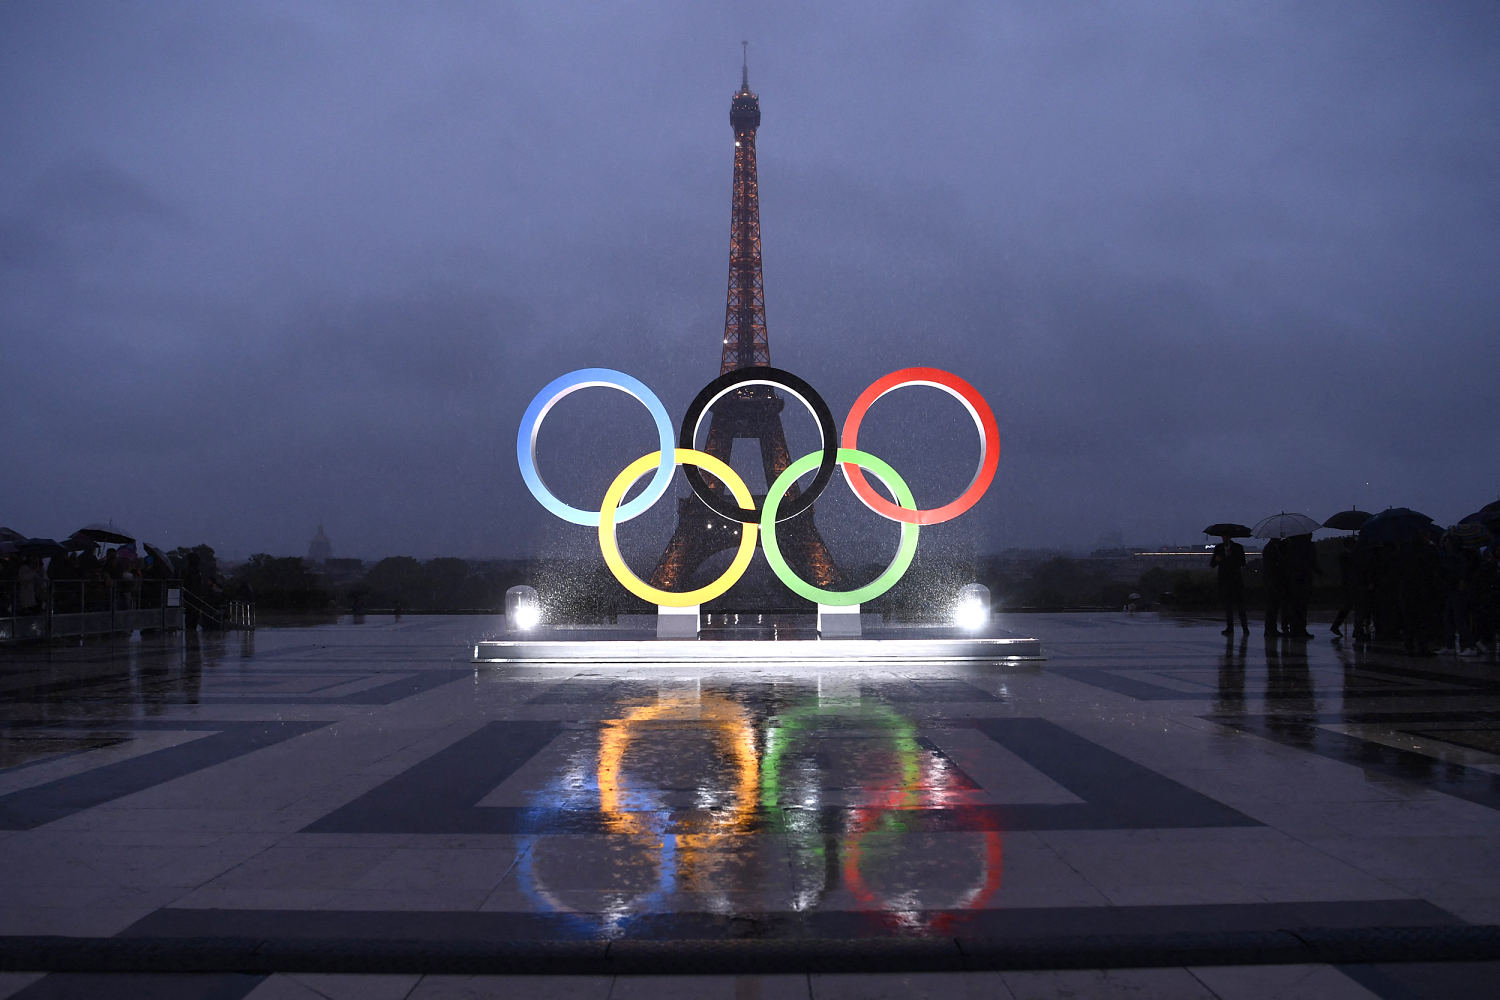 The Olympic rings for the Paris Games will be displayed on the Eiffel Tower